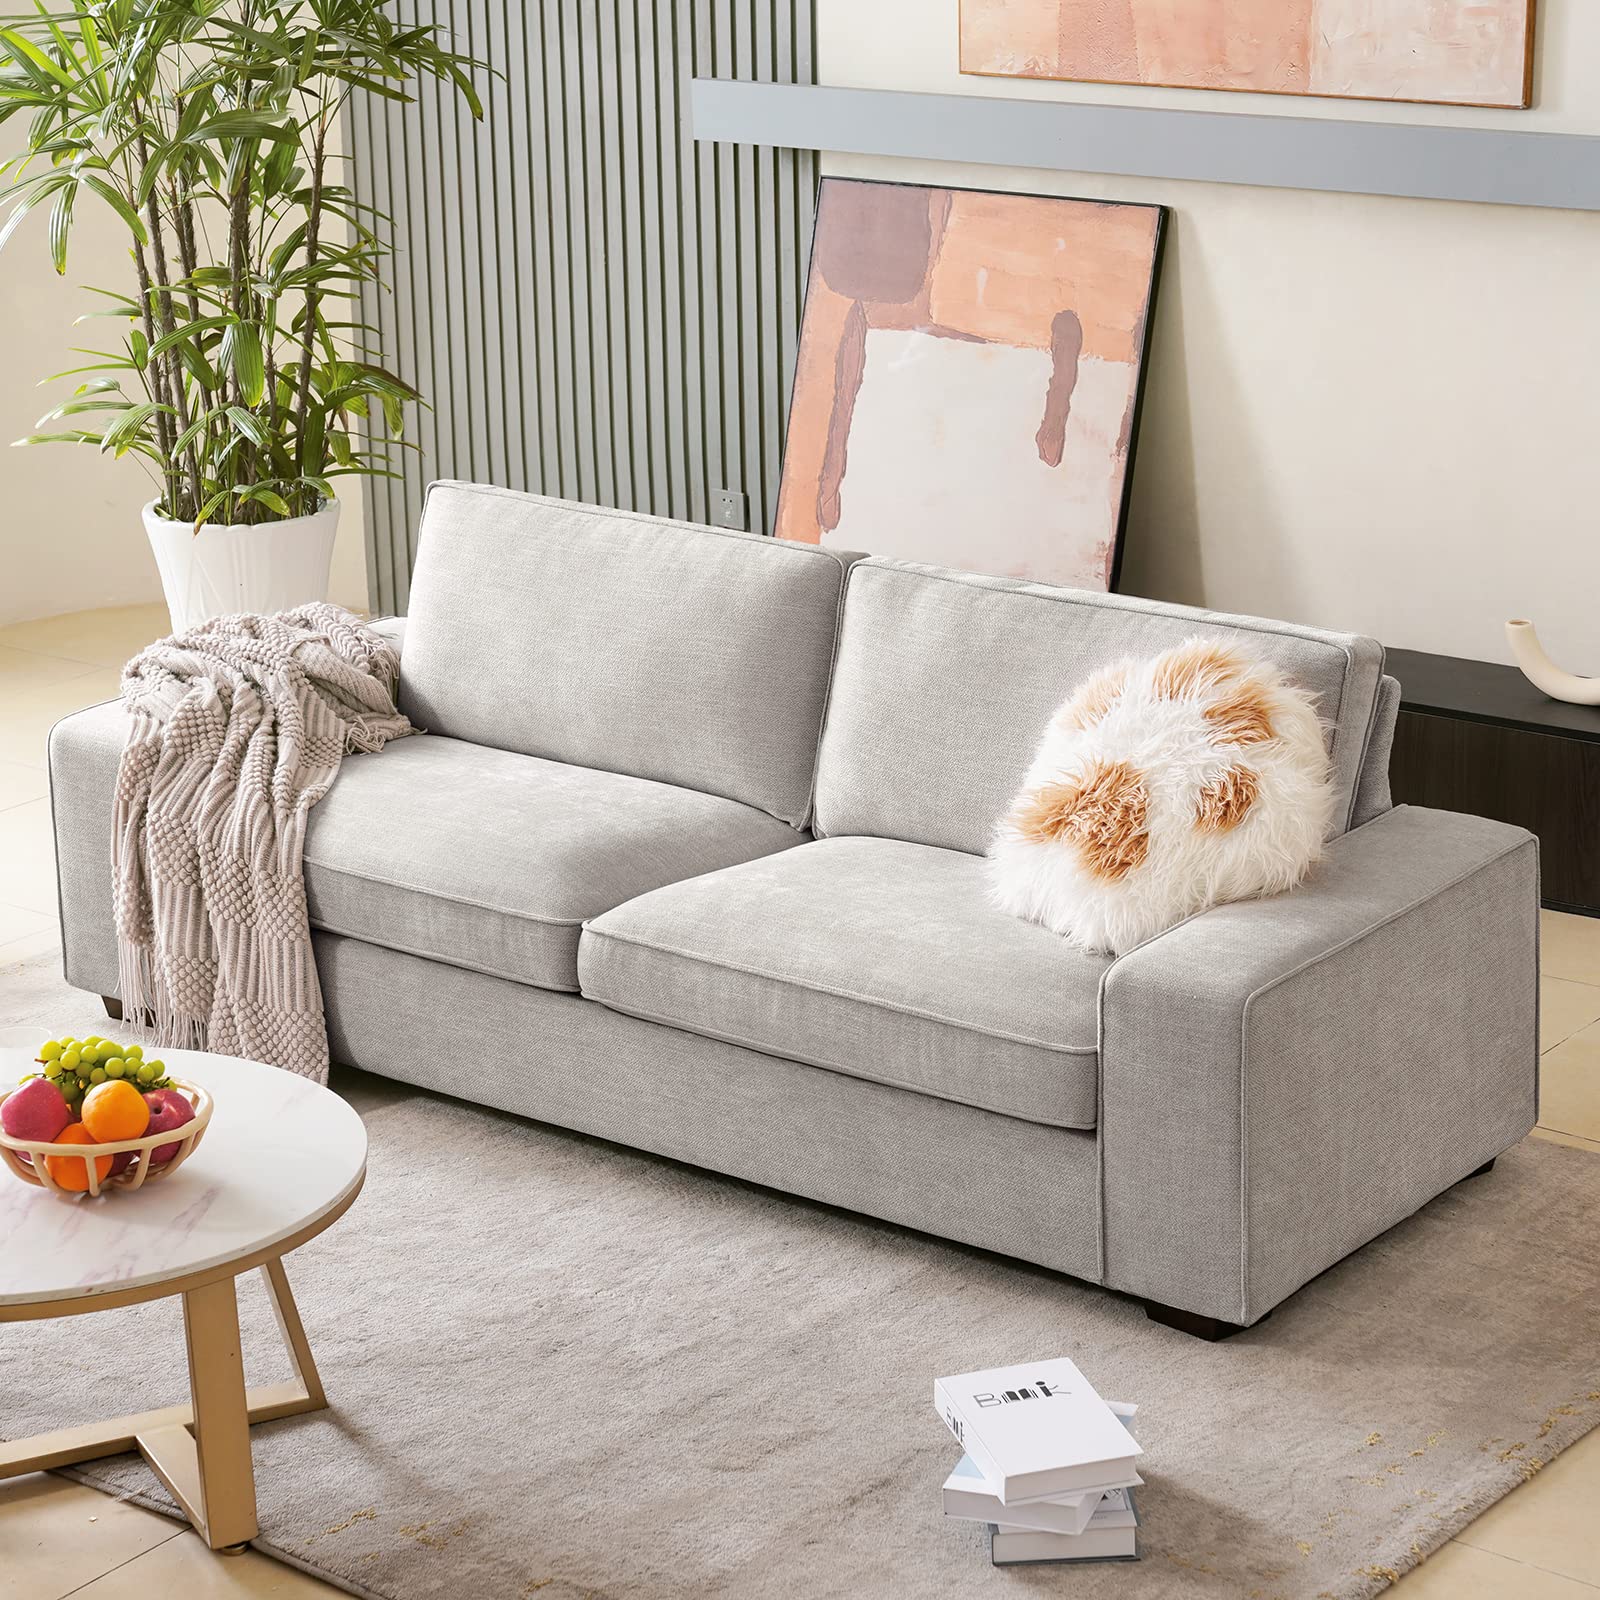 Special discounts on grey modern loveseat sofas being sold at coosleep home